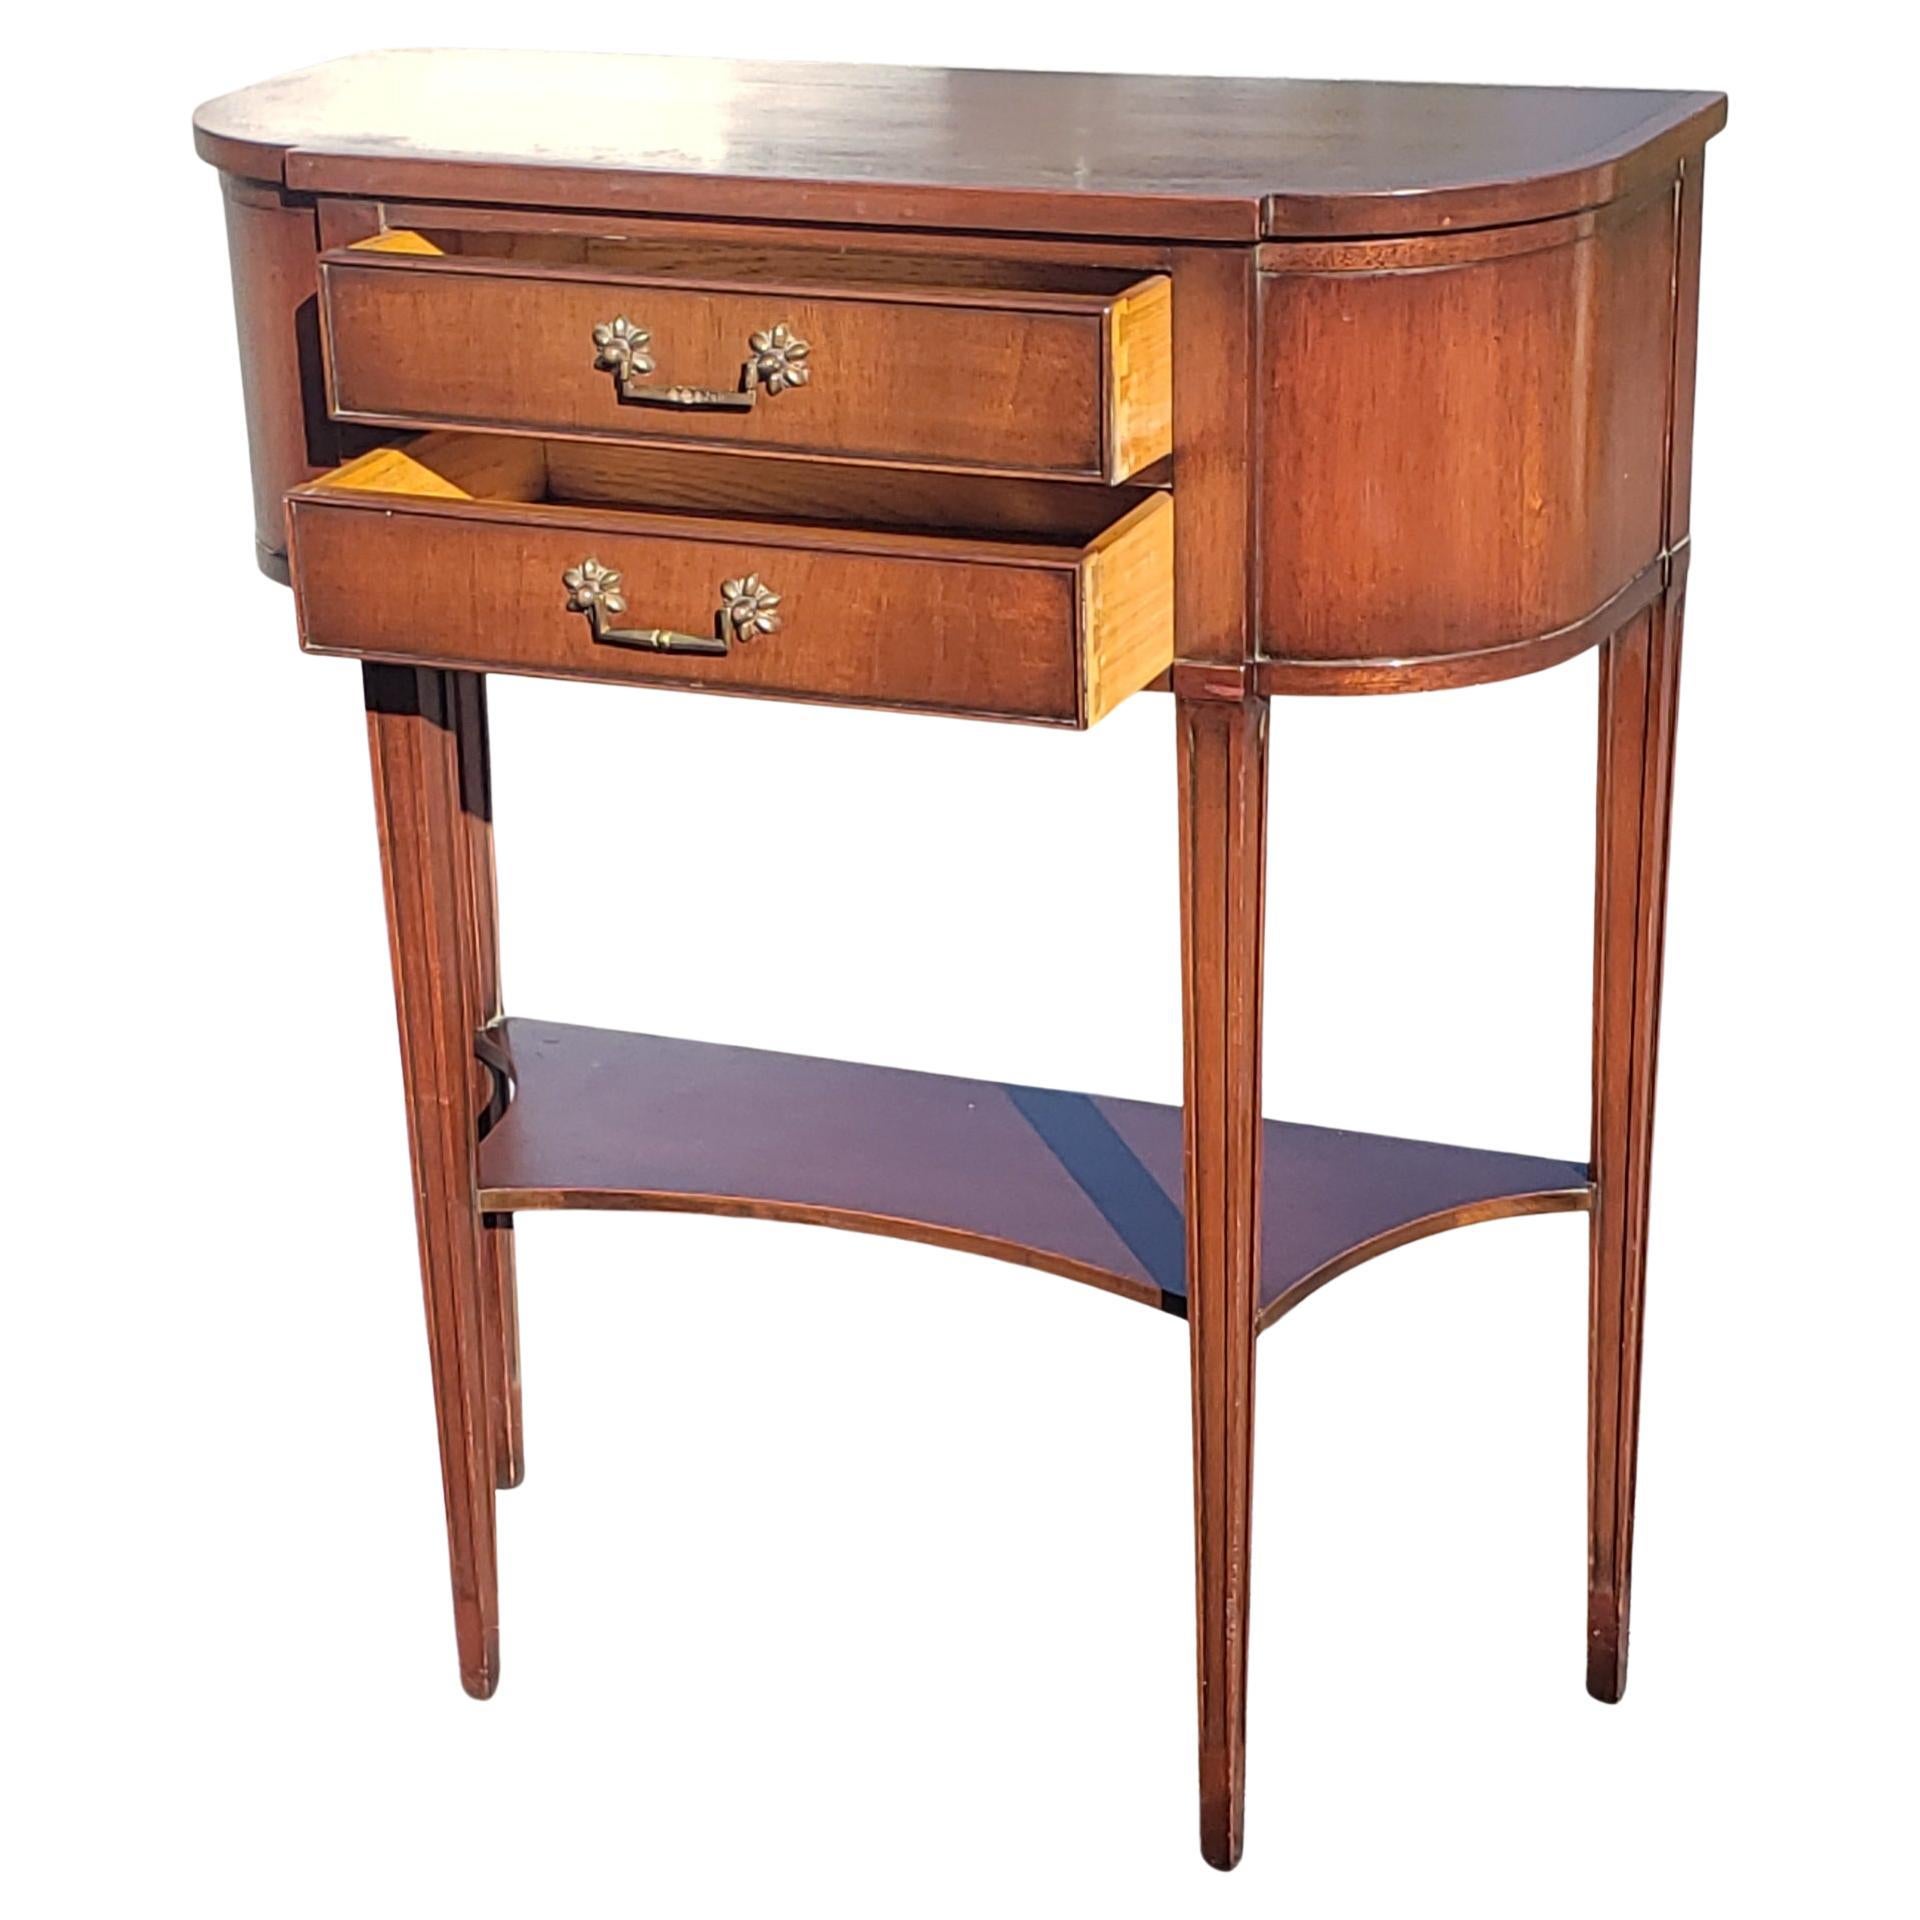 20th Century Pair of Tier 2-Drawer Banded Mahogany Regency Console Tables, Circa 1940s